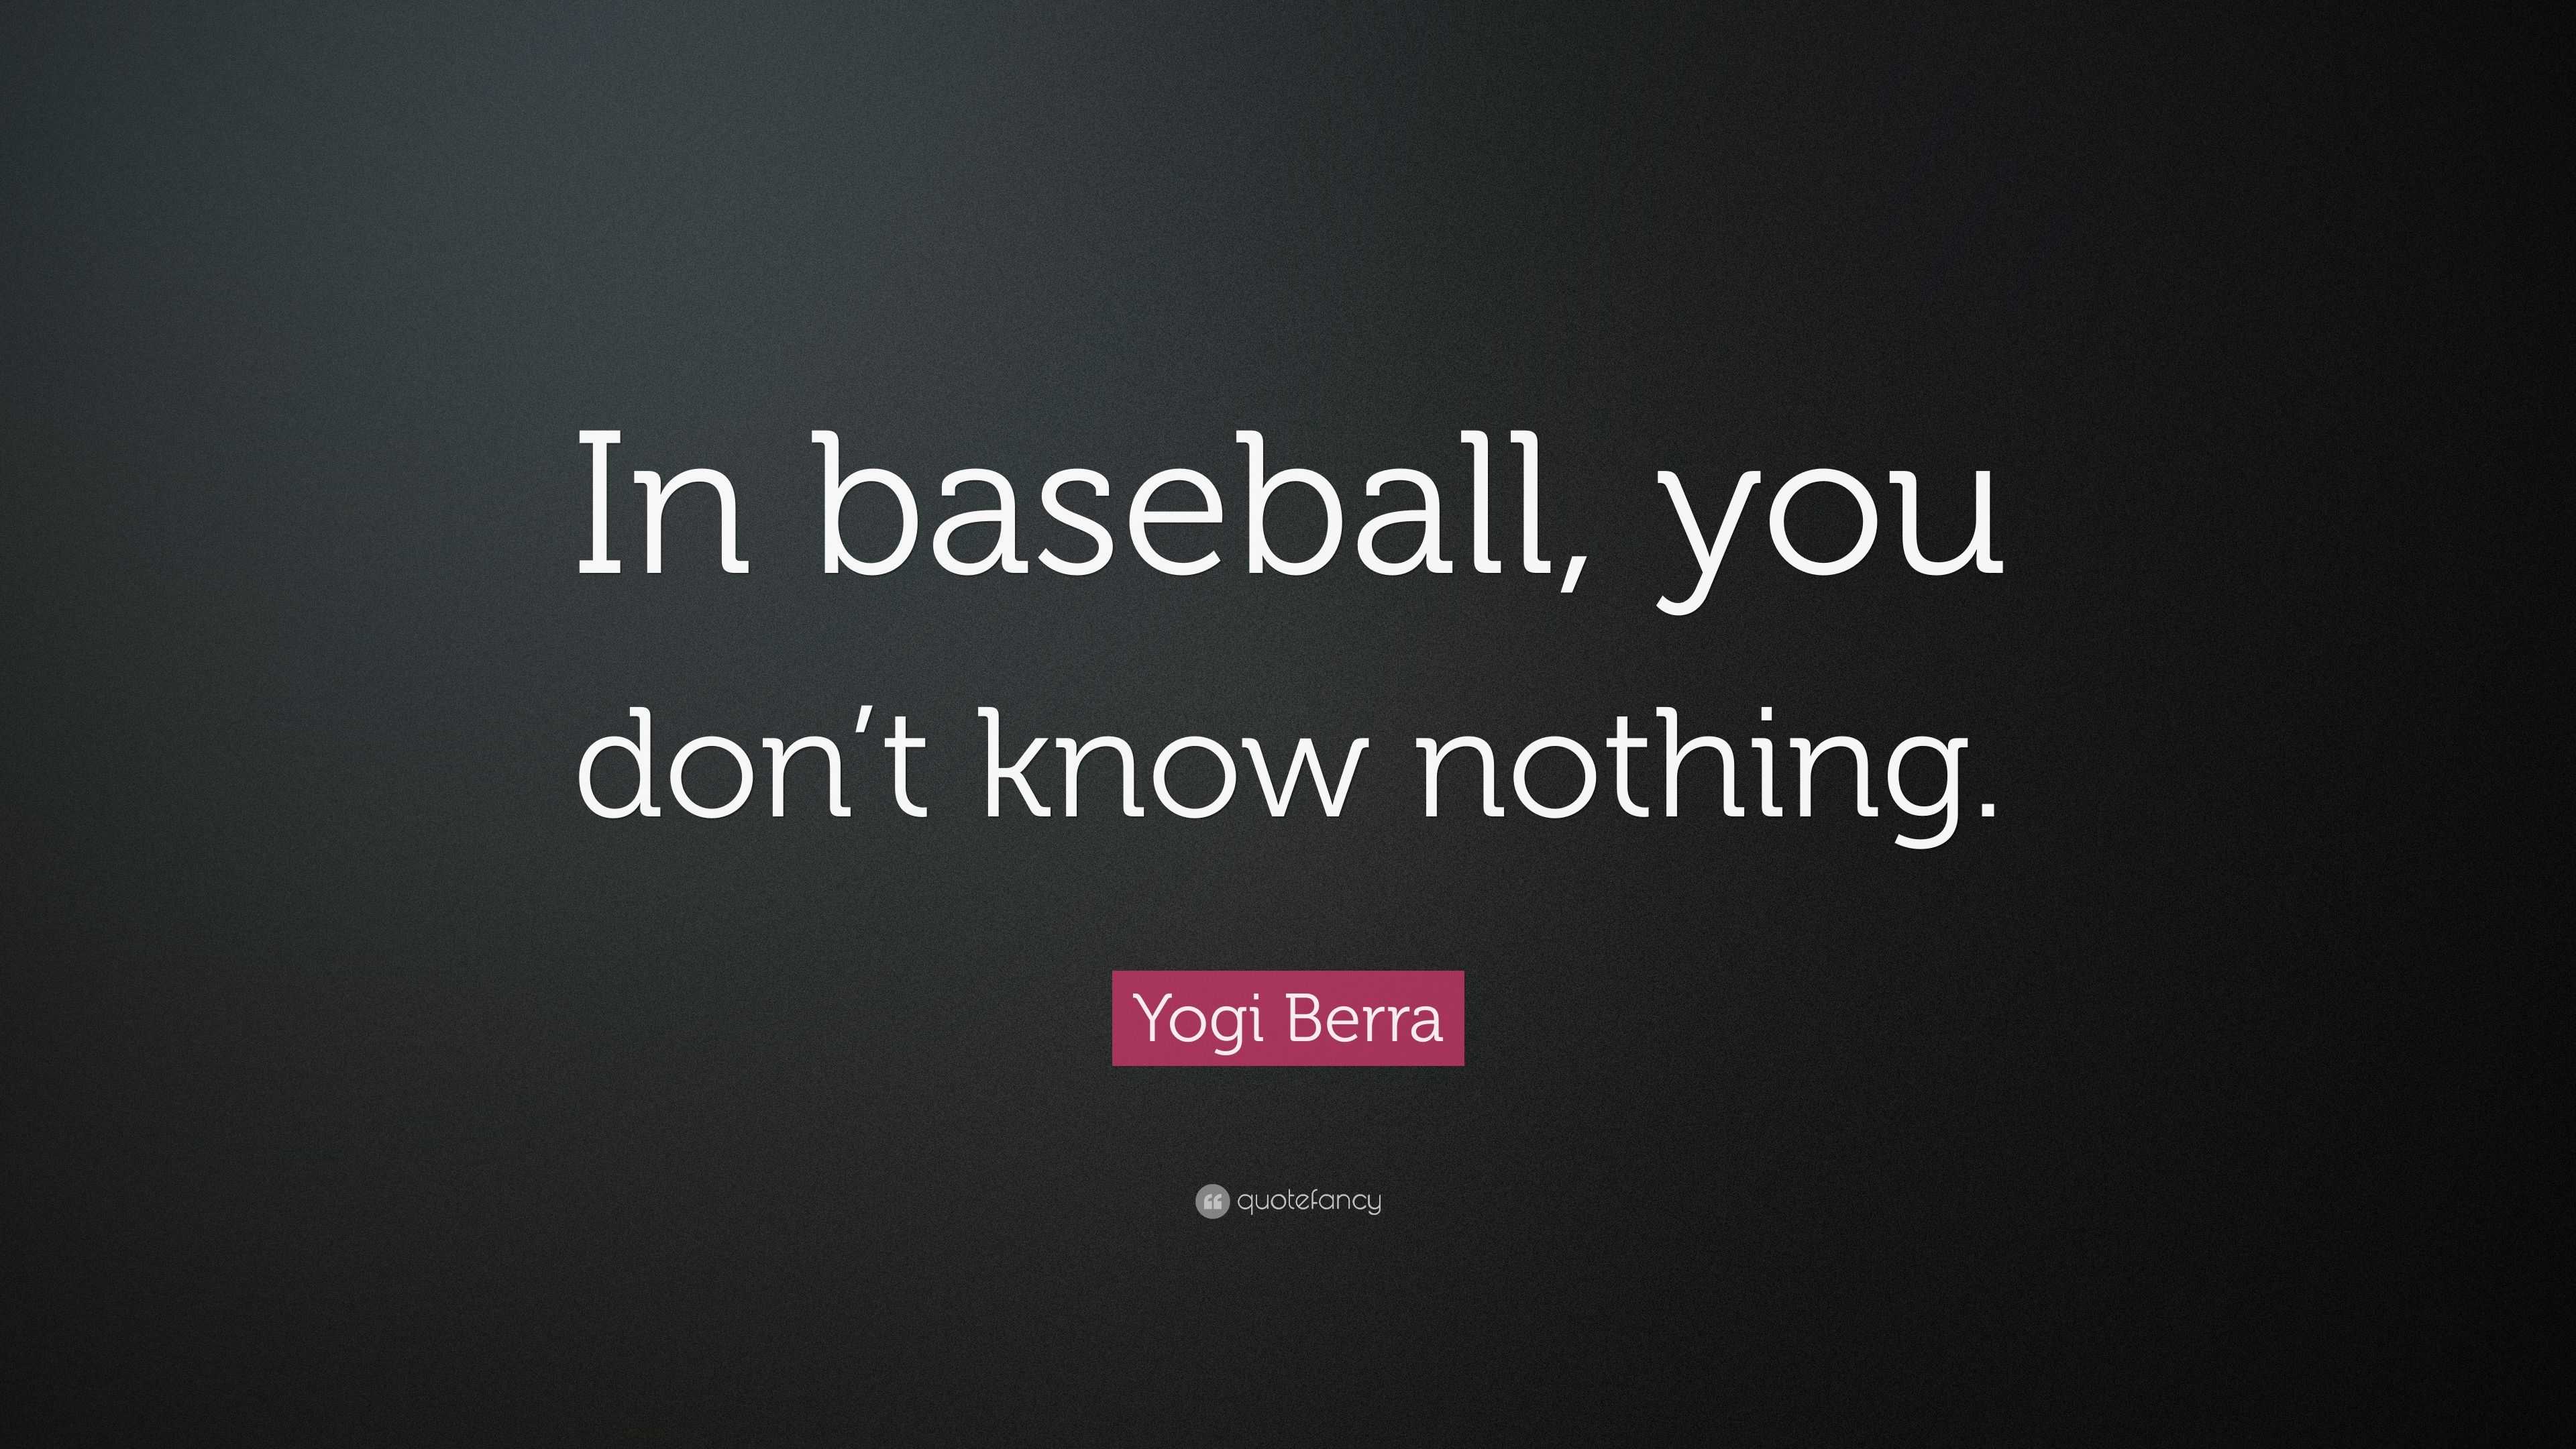 Yogi Berra Quote: “In baseball, you don’t know nothing.”